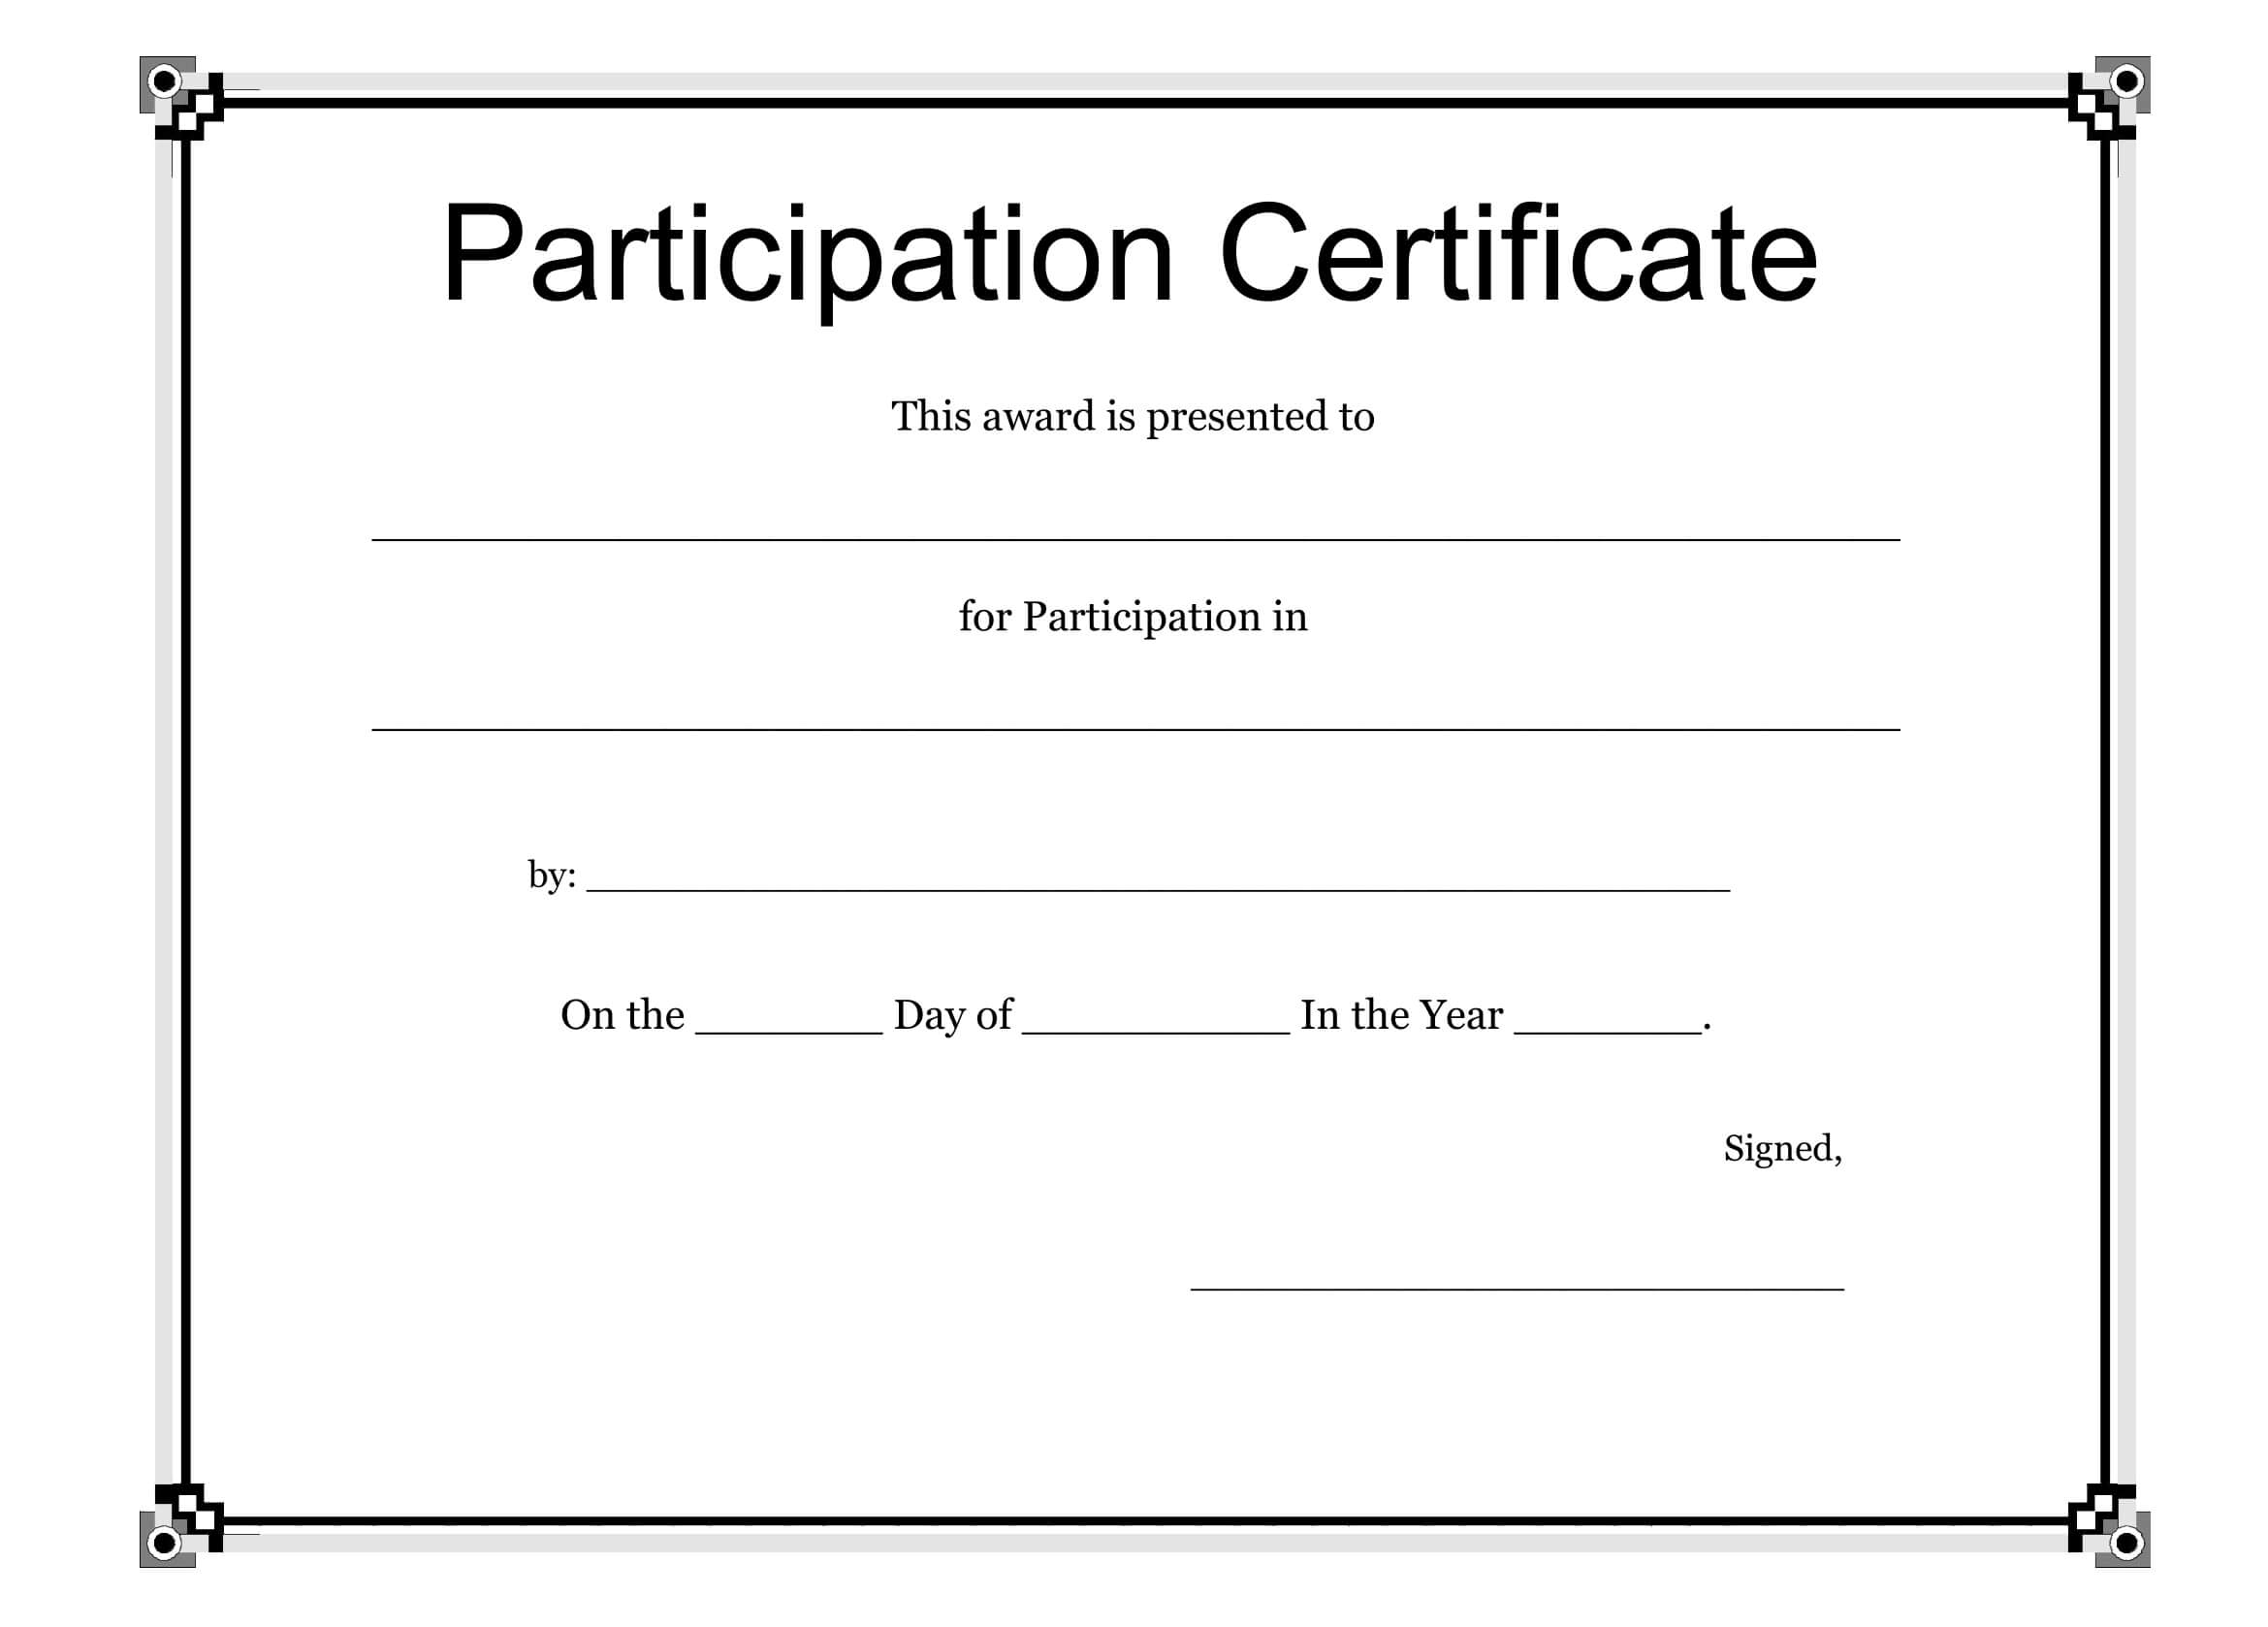 Participation Certificate Template - Free Download With Regard To Certification Of Participation Free Template